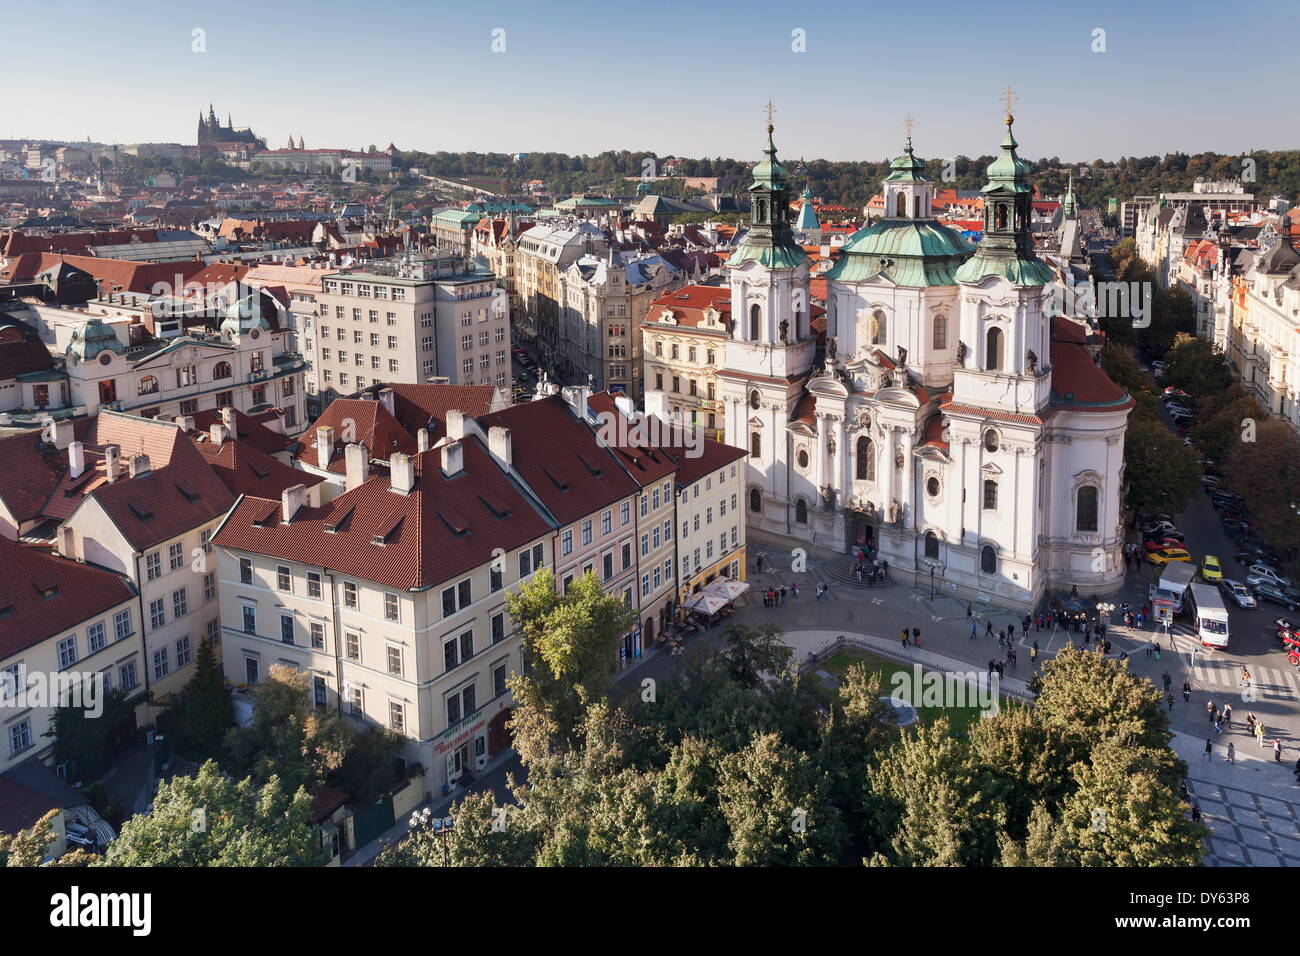 View of Old Town Square to St. Nicholas Church and Castle District, Royal Palace and St. Vitus Cathedral, Prague, Czech Republic Stock Photo